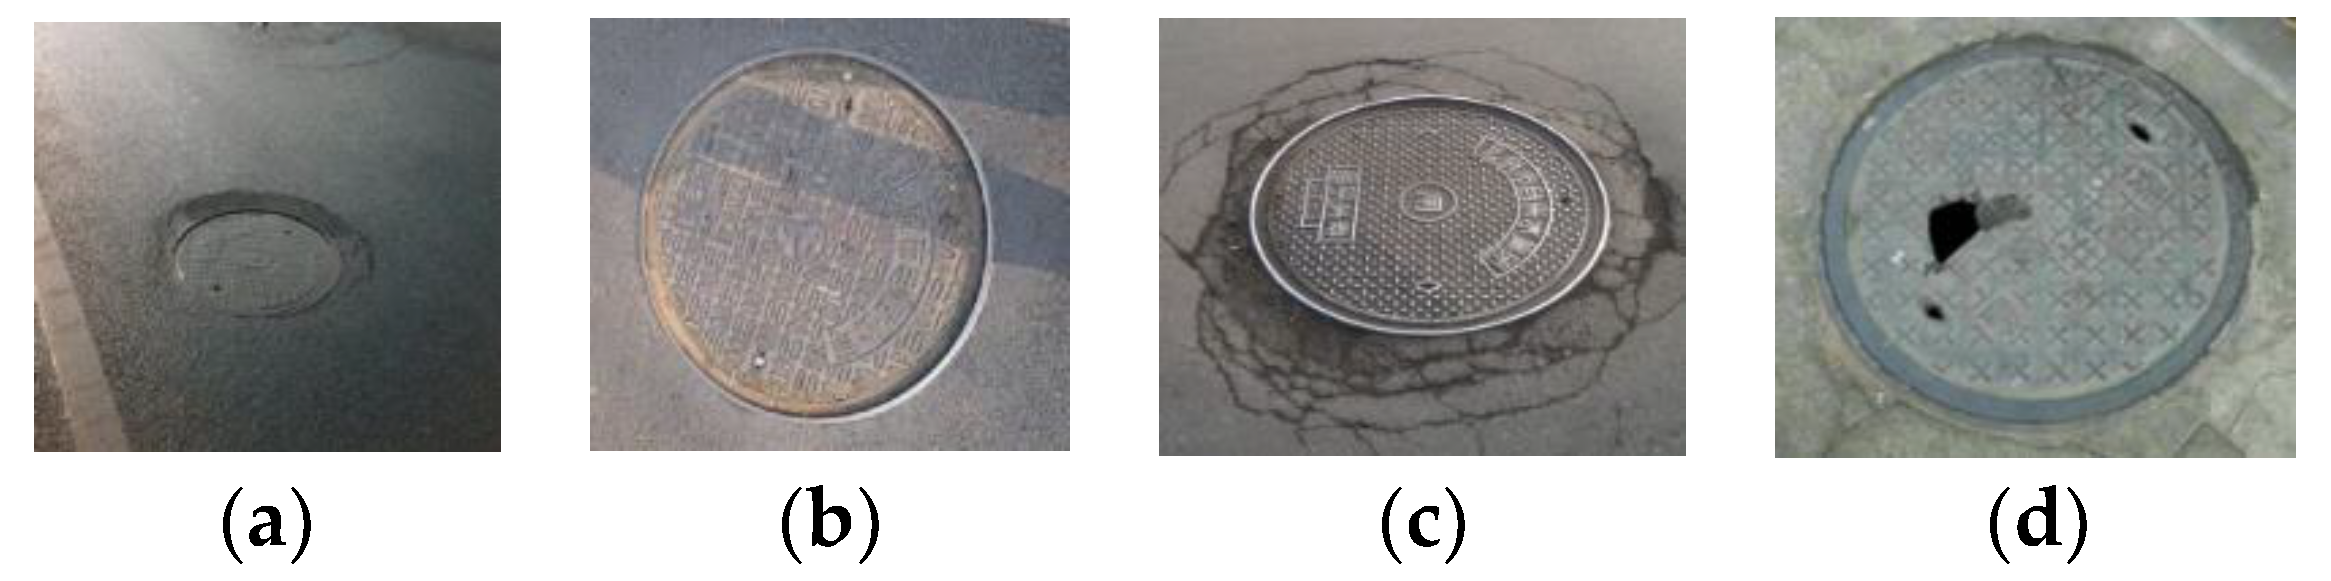 Search, Identification and Positioning of the Underground Manhole